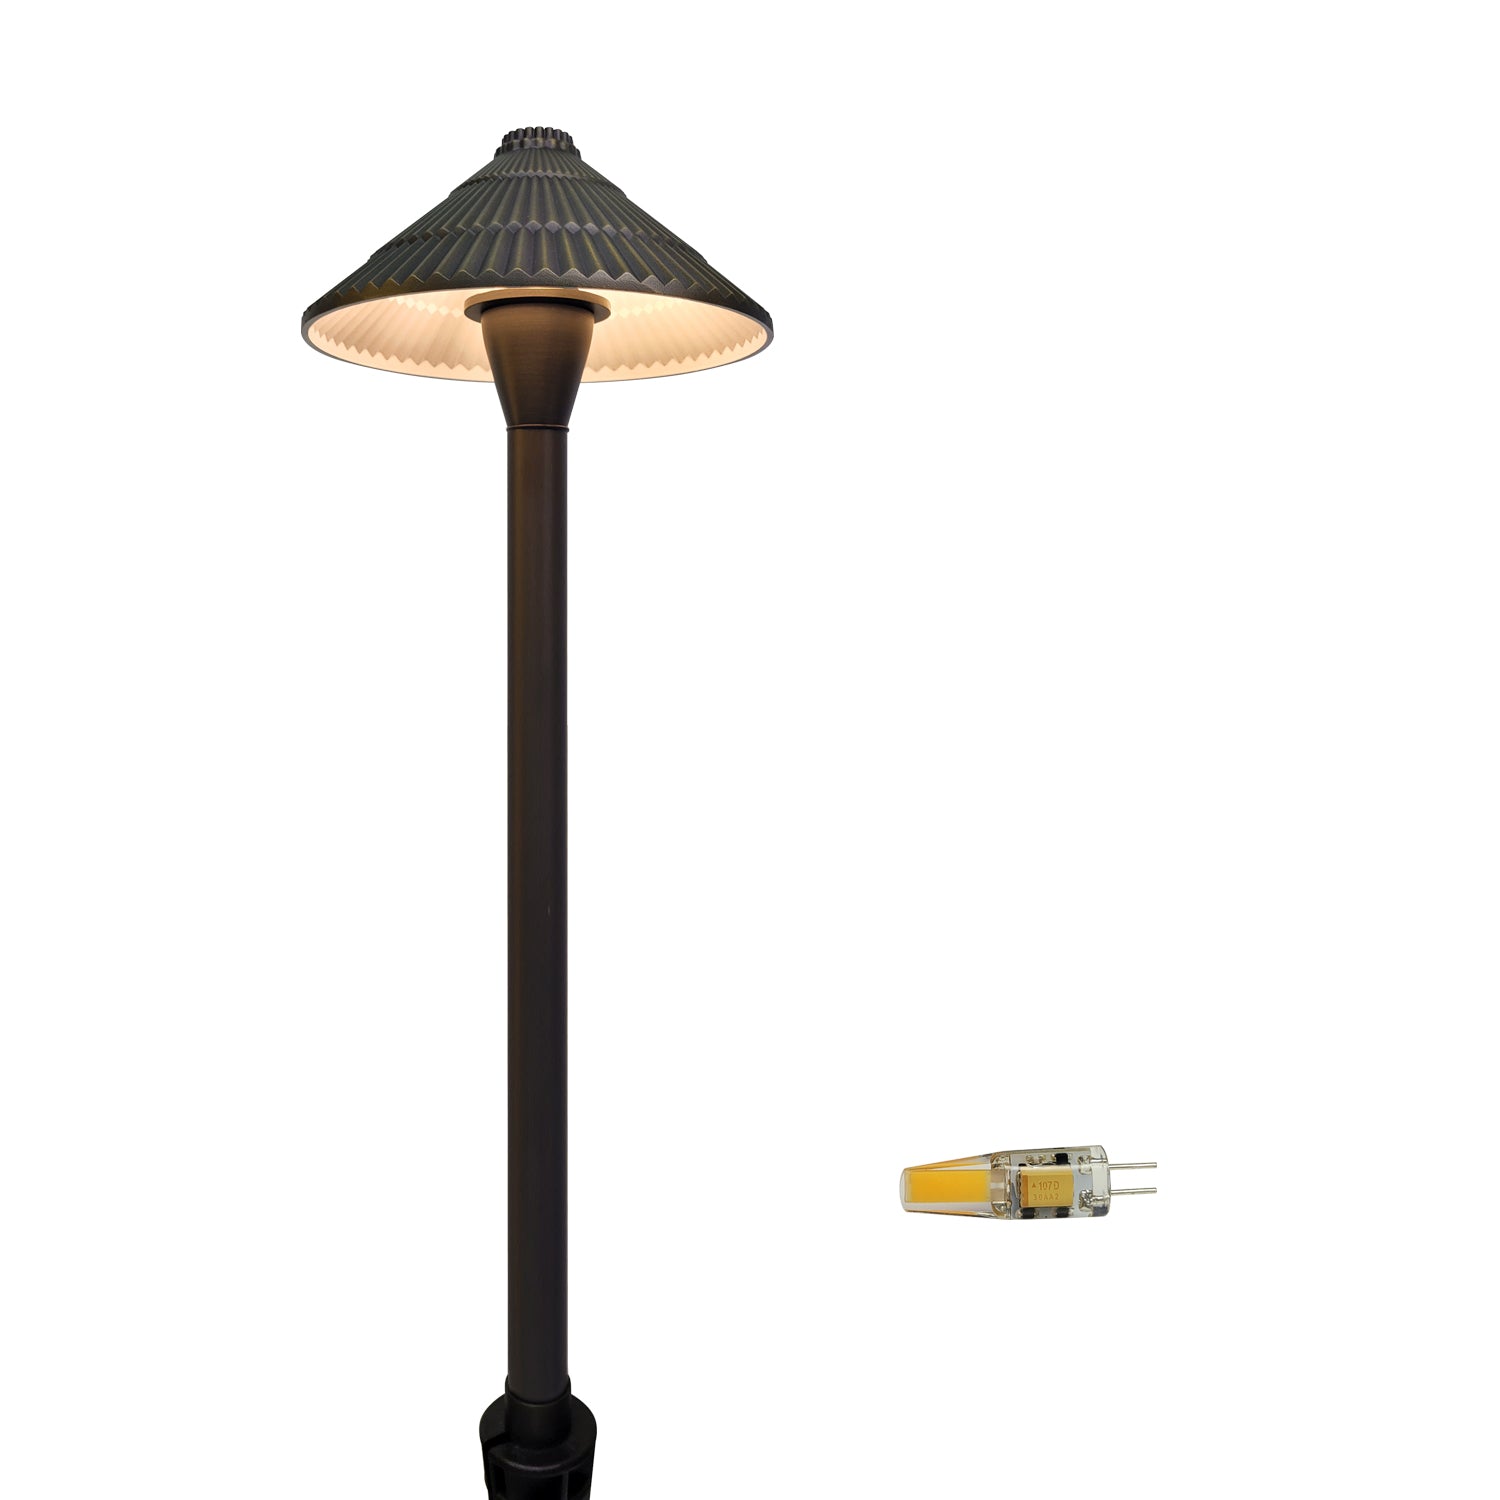 Brass LED Garden Pathway Light COP604B with illuminated lamp and included low voltage bulb